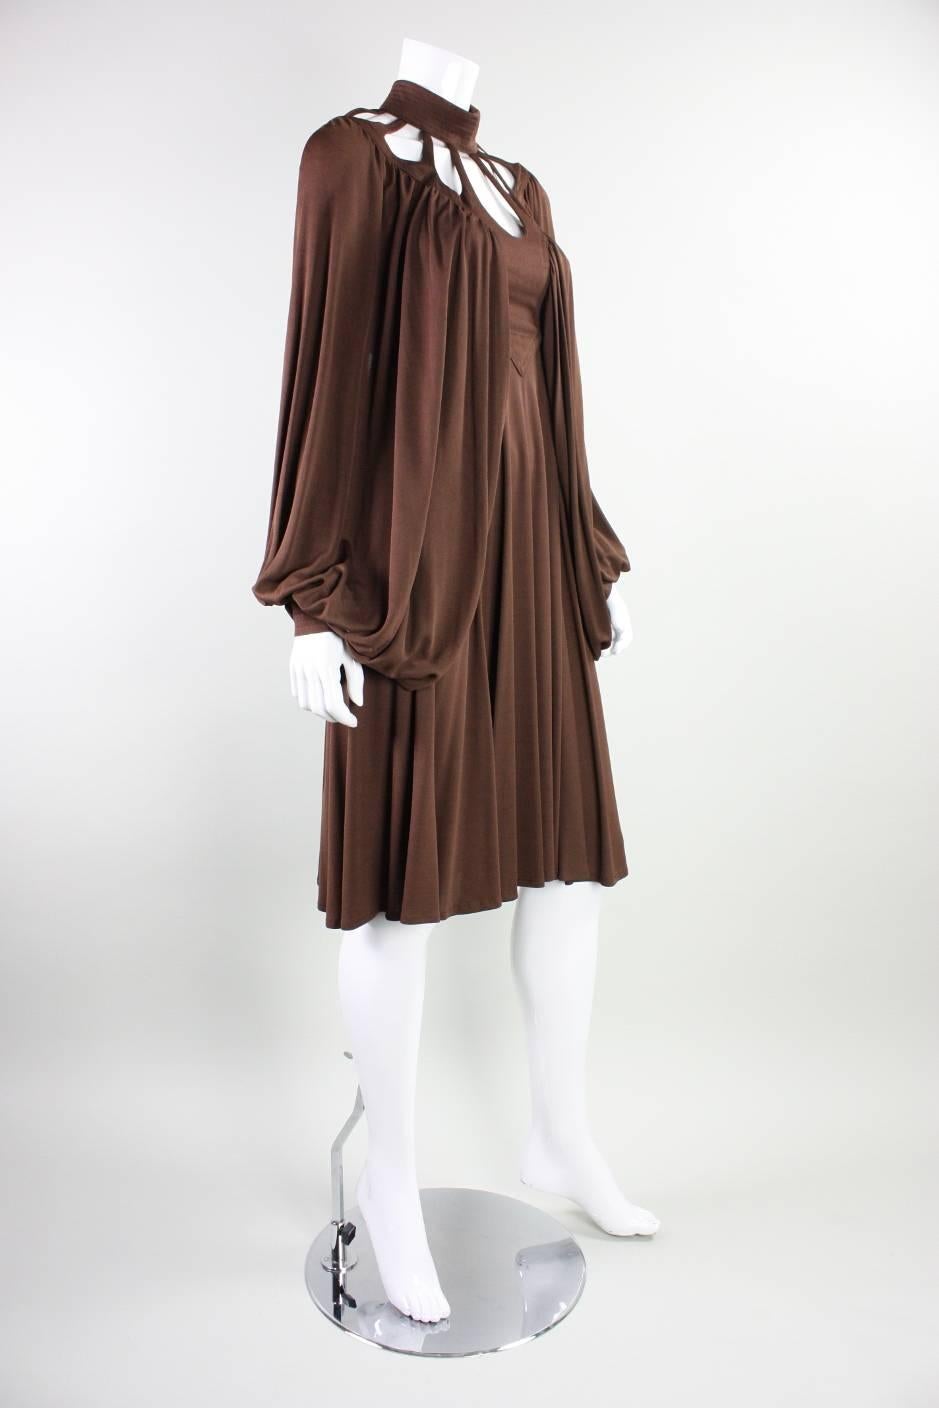 Vintage dress from English designer Leslie Sandra dates to the late 1960's through 1970's.  It is made of high-quality chocolate brown stretch matte jersey and features beautiful rounded cutouts around the front and back necklines.  Dense draping